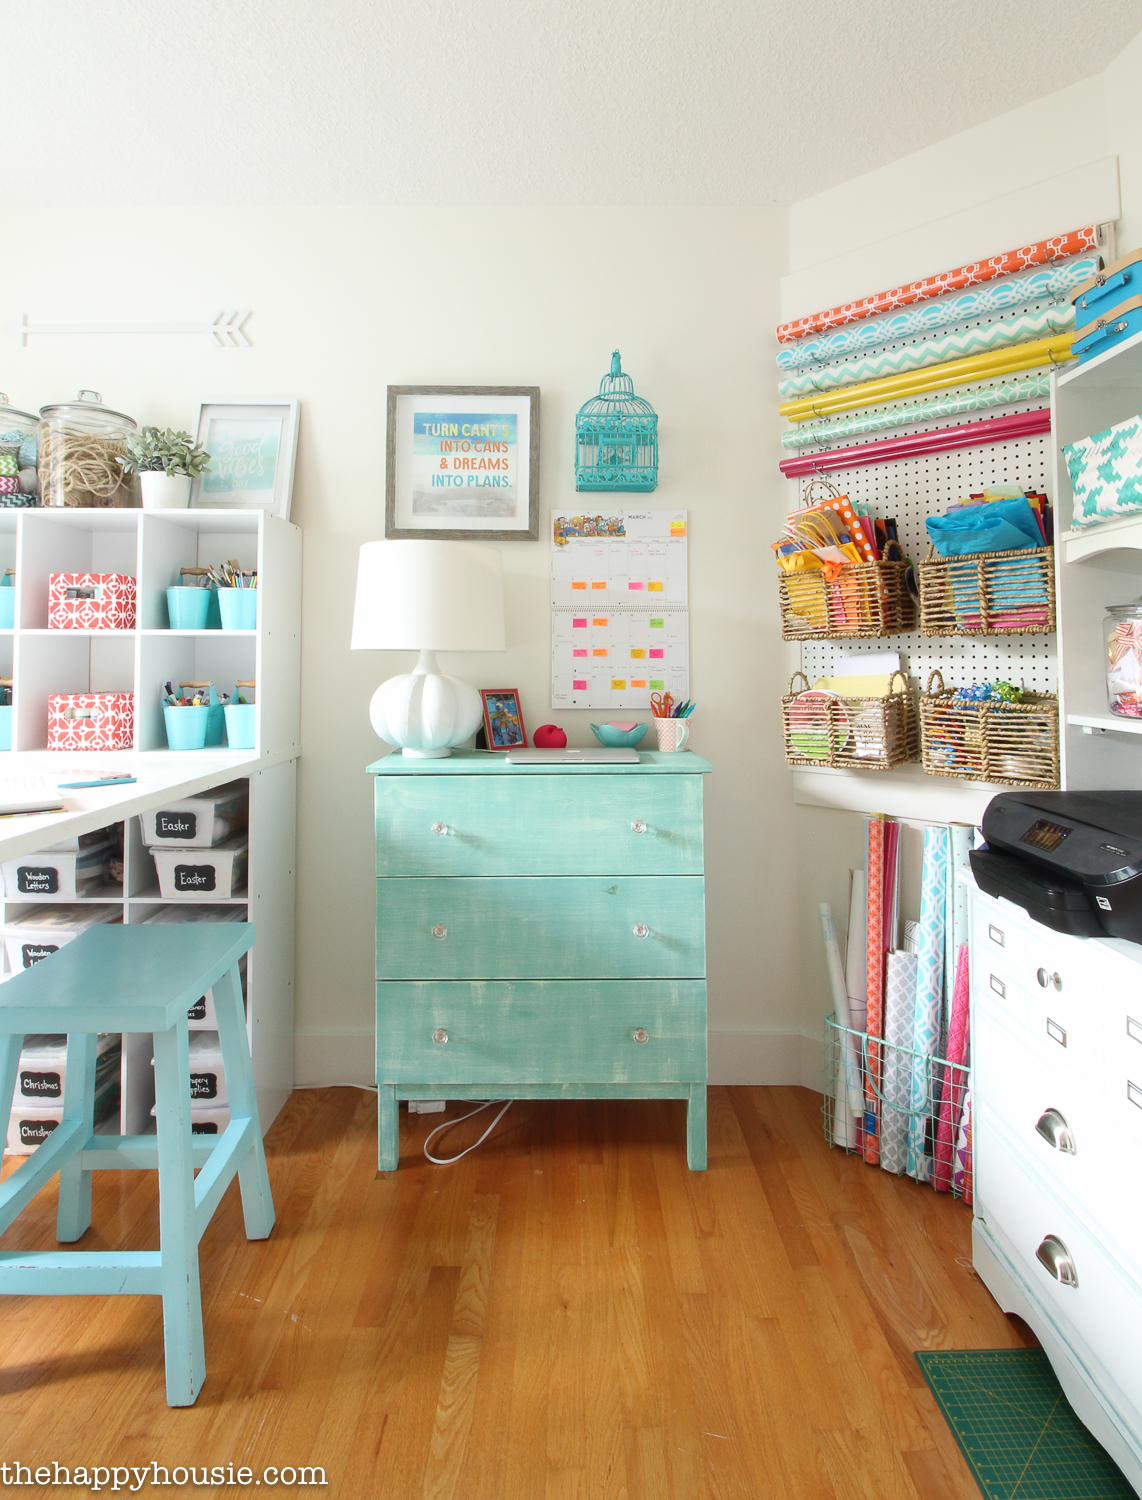 How to Organize a Craft Room Work Space | The Happy Housie